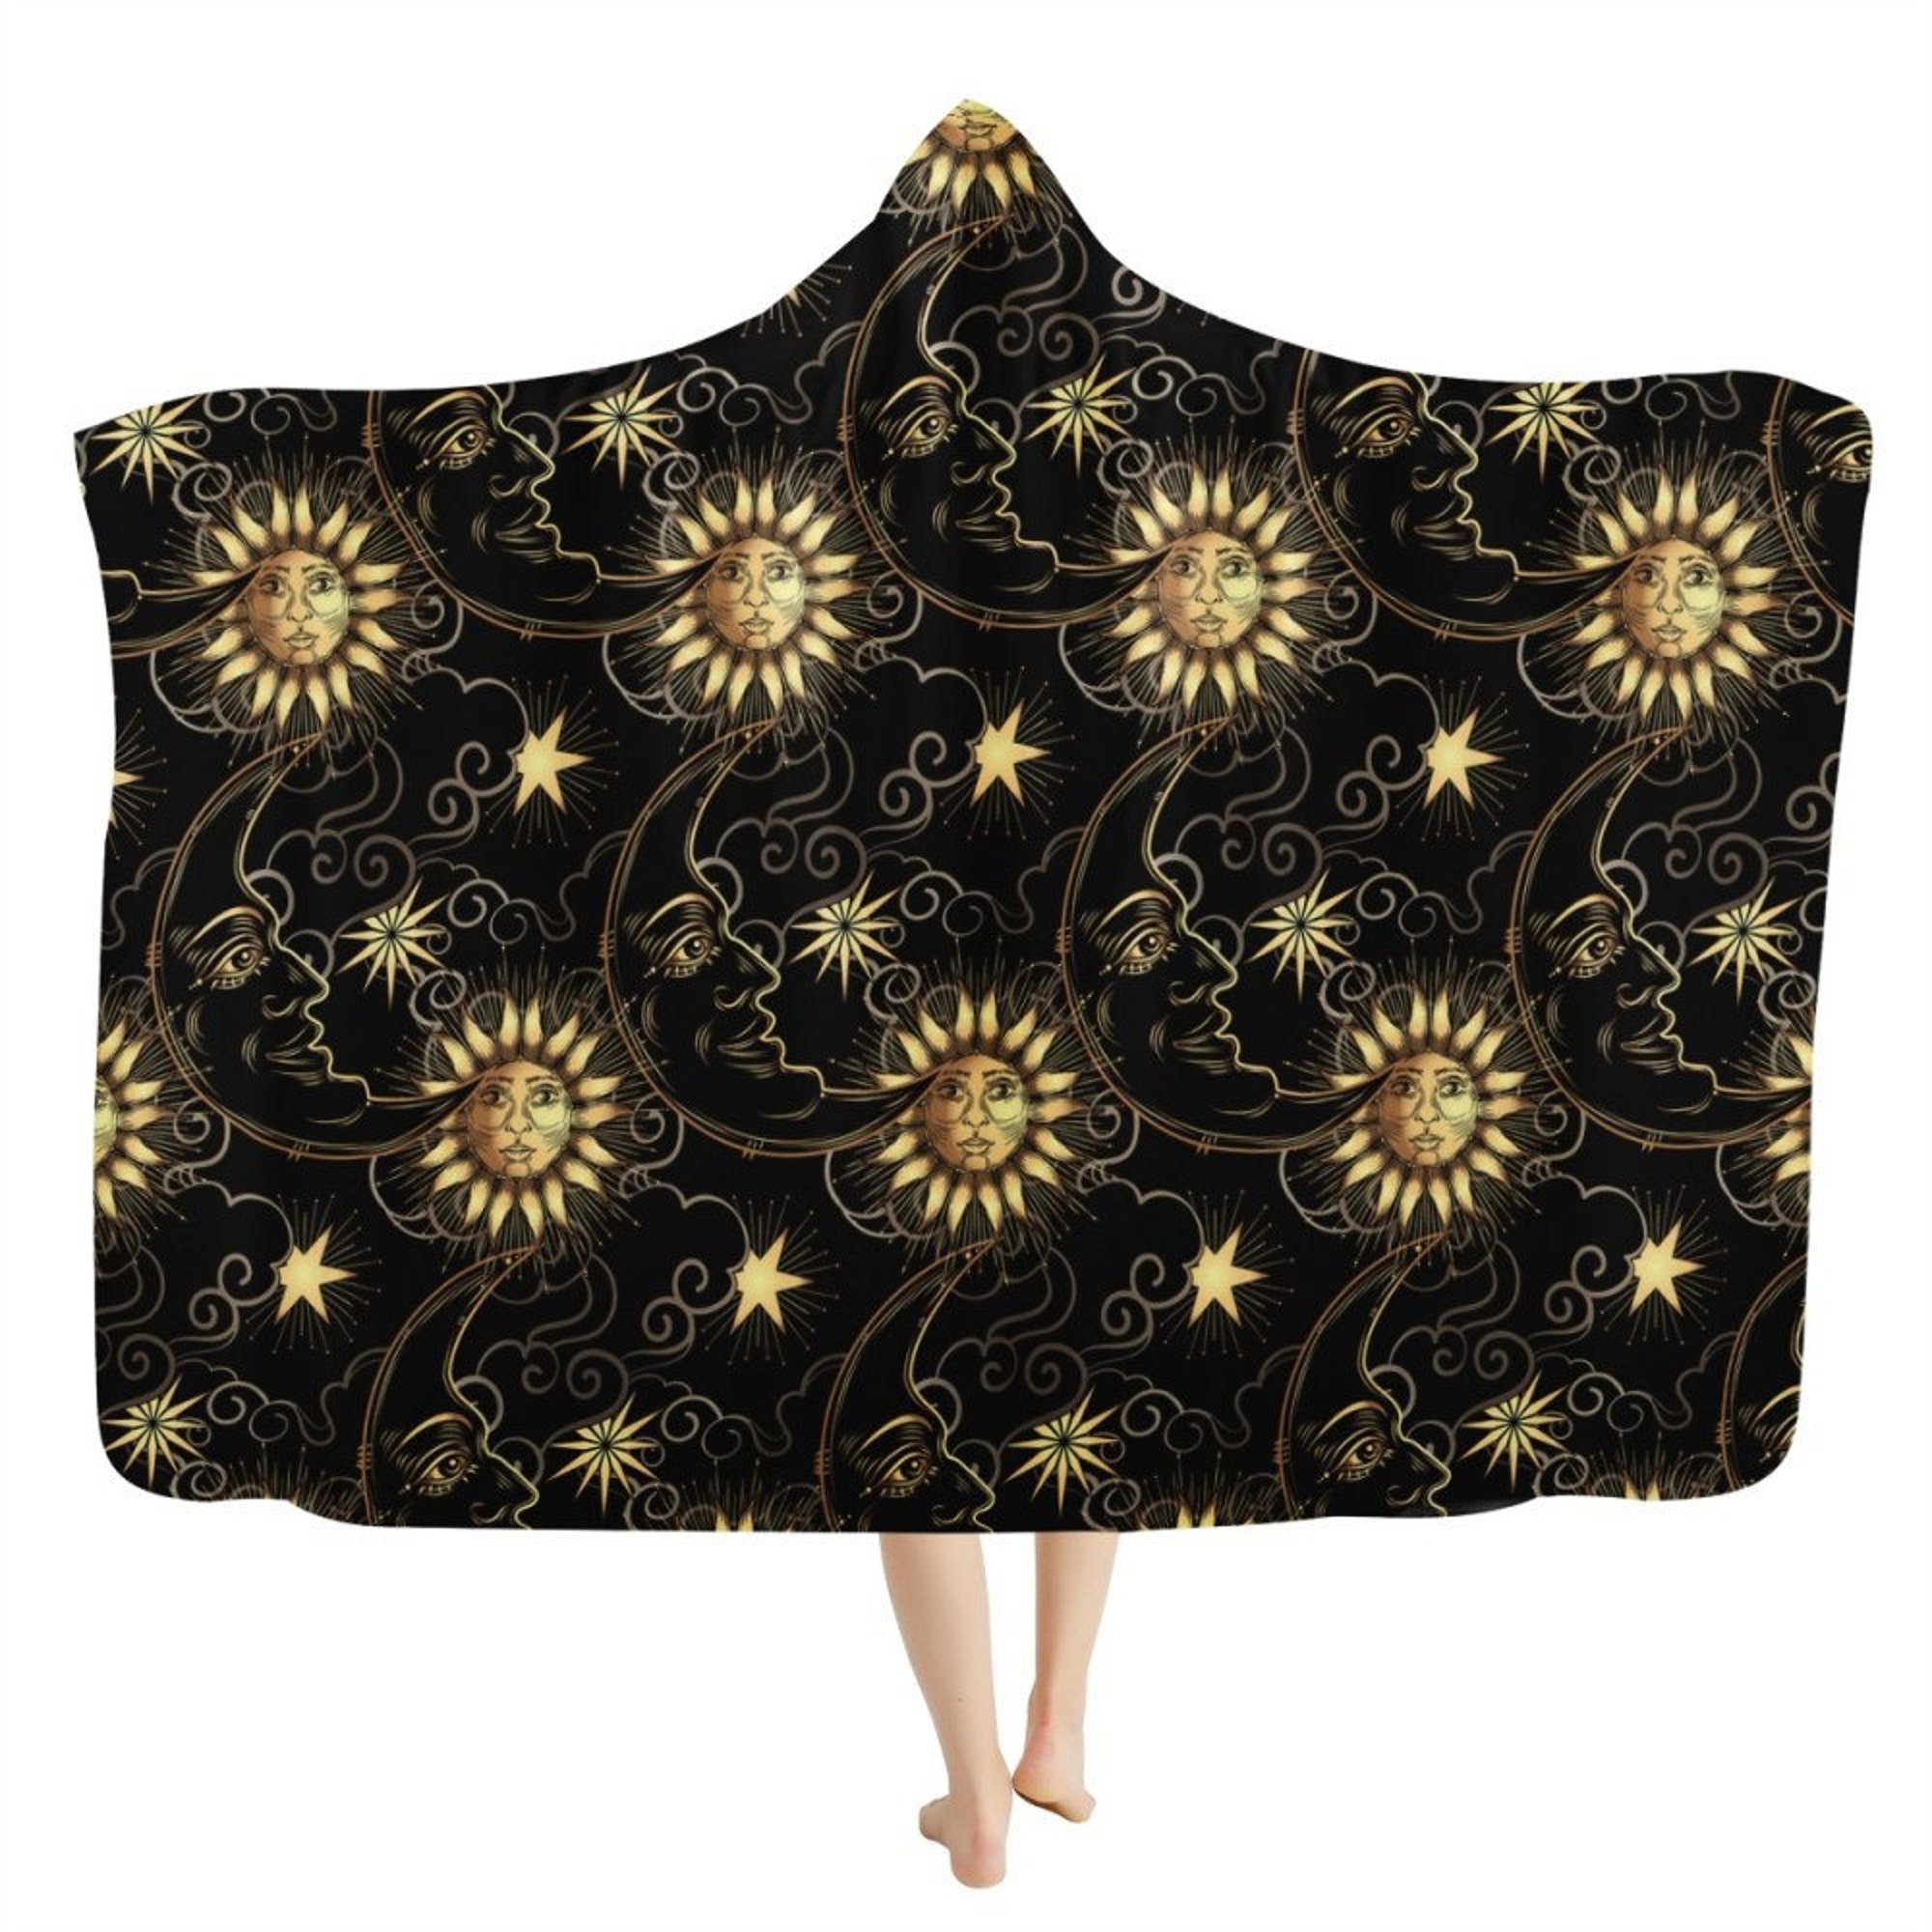 Discover Boho Sun And Moon Pattern Hooded Blanket